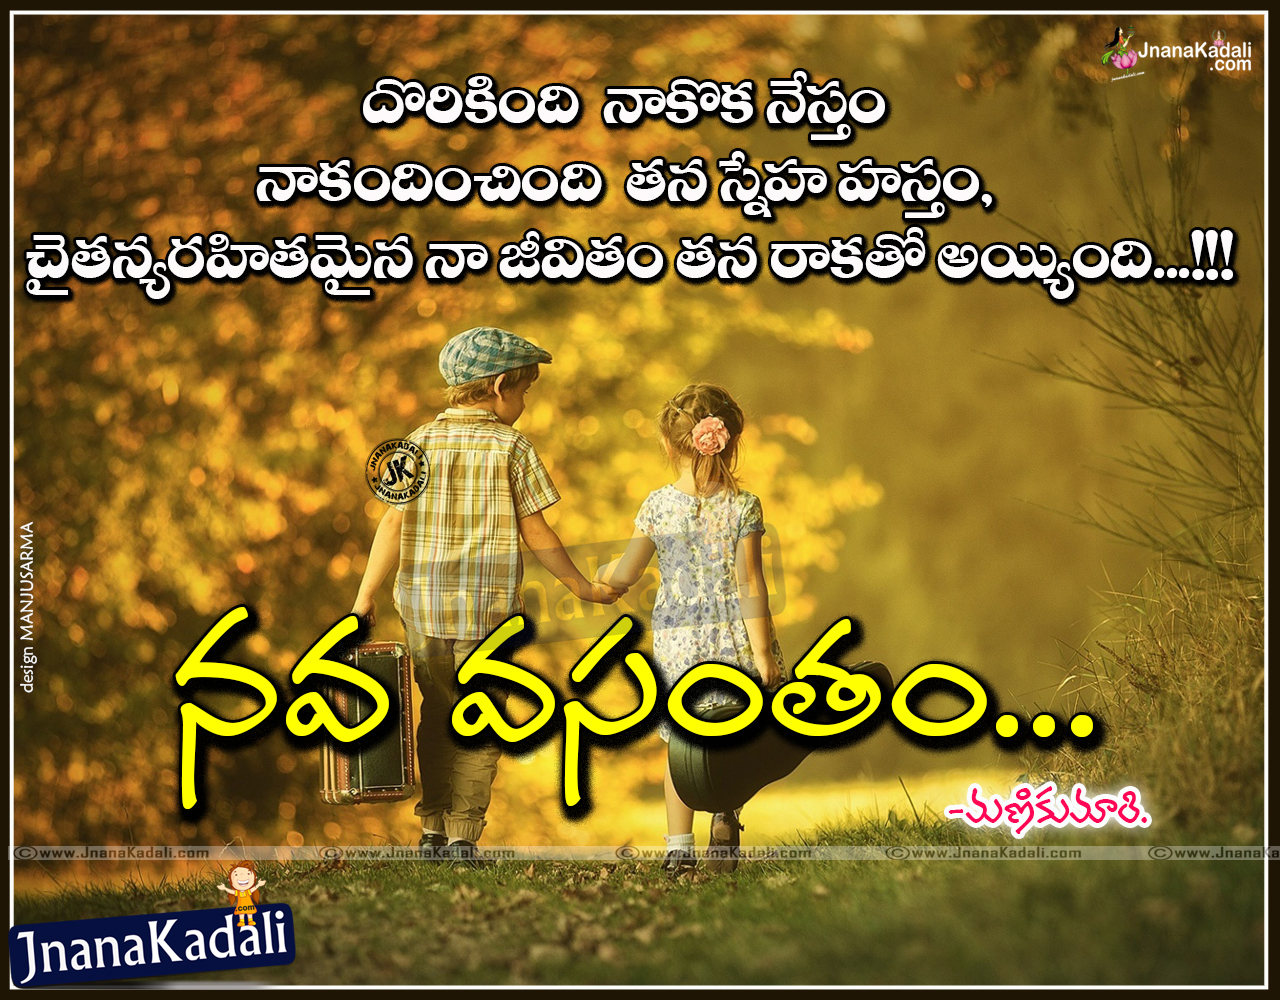 Telugu Quotes For Best Friends | Friends Forever Quotes In Telugu | Jnana Kadali.com |Telugu Quotes|English Quotes|Hindi Quotes|Tamil Quotes |Dharmasandehalu|